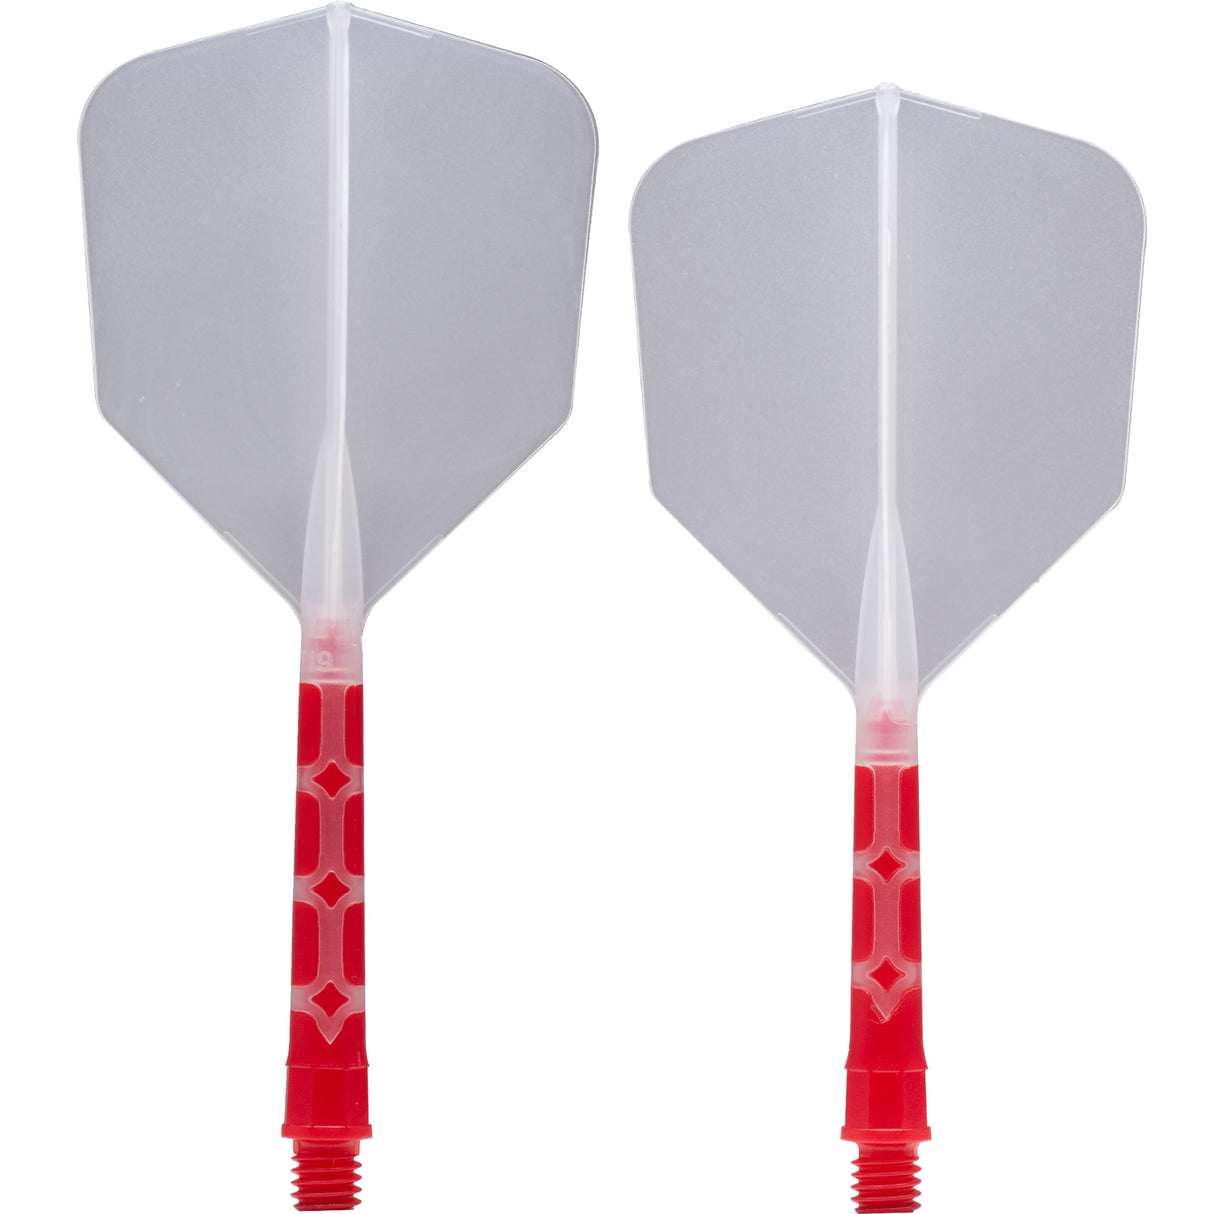 *Cuesoul Rost T19 Integrated Dart Shaft and Flights - Big Wing - Red with Clear Flight